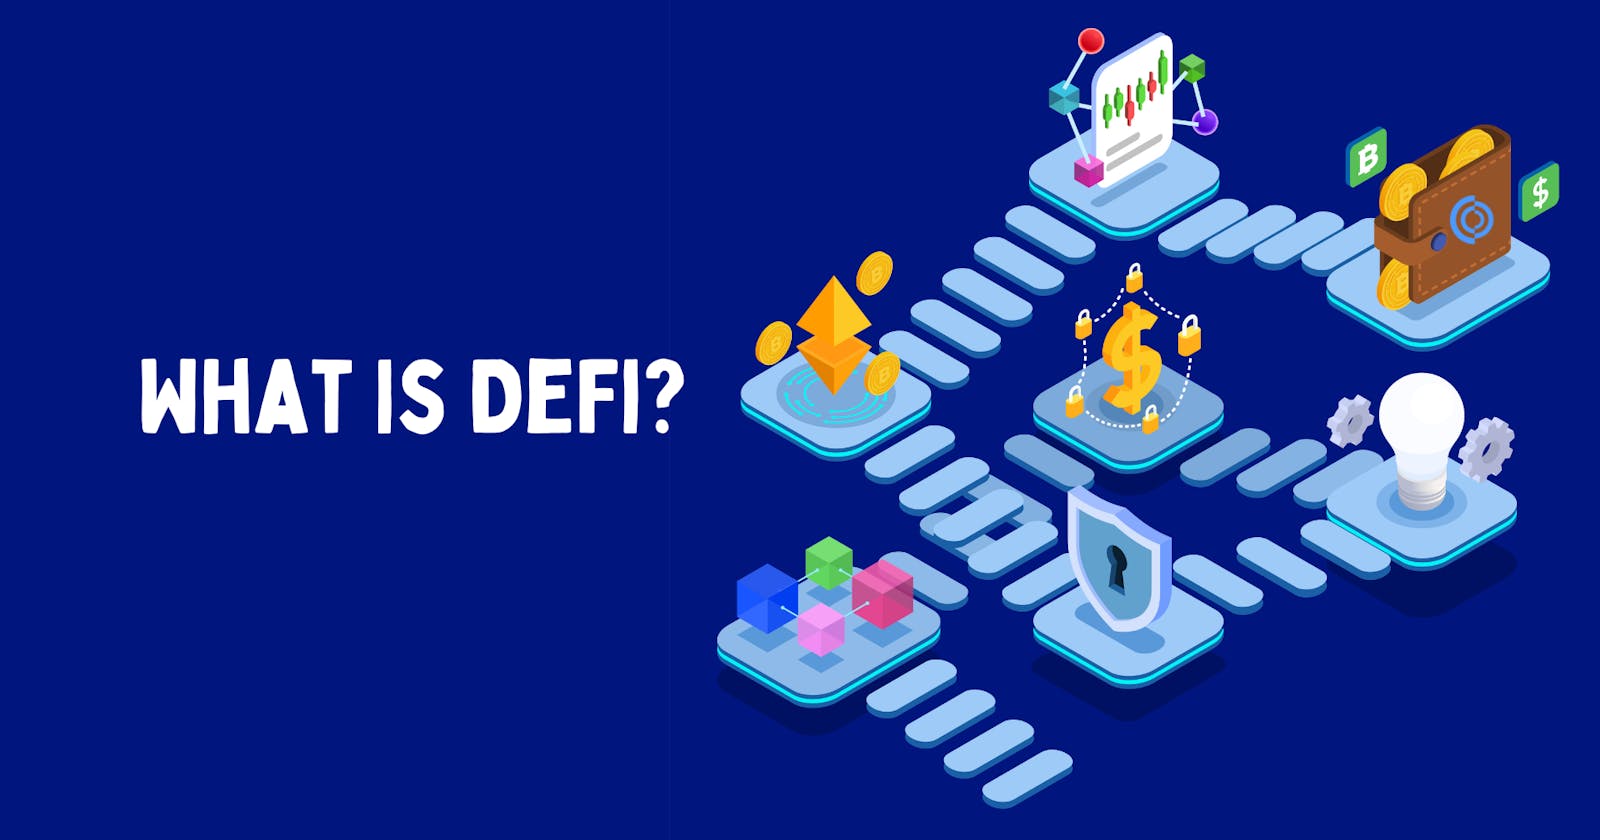 What is (Decentralized Finance)DeFi?